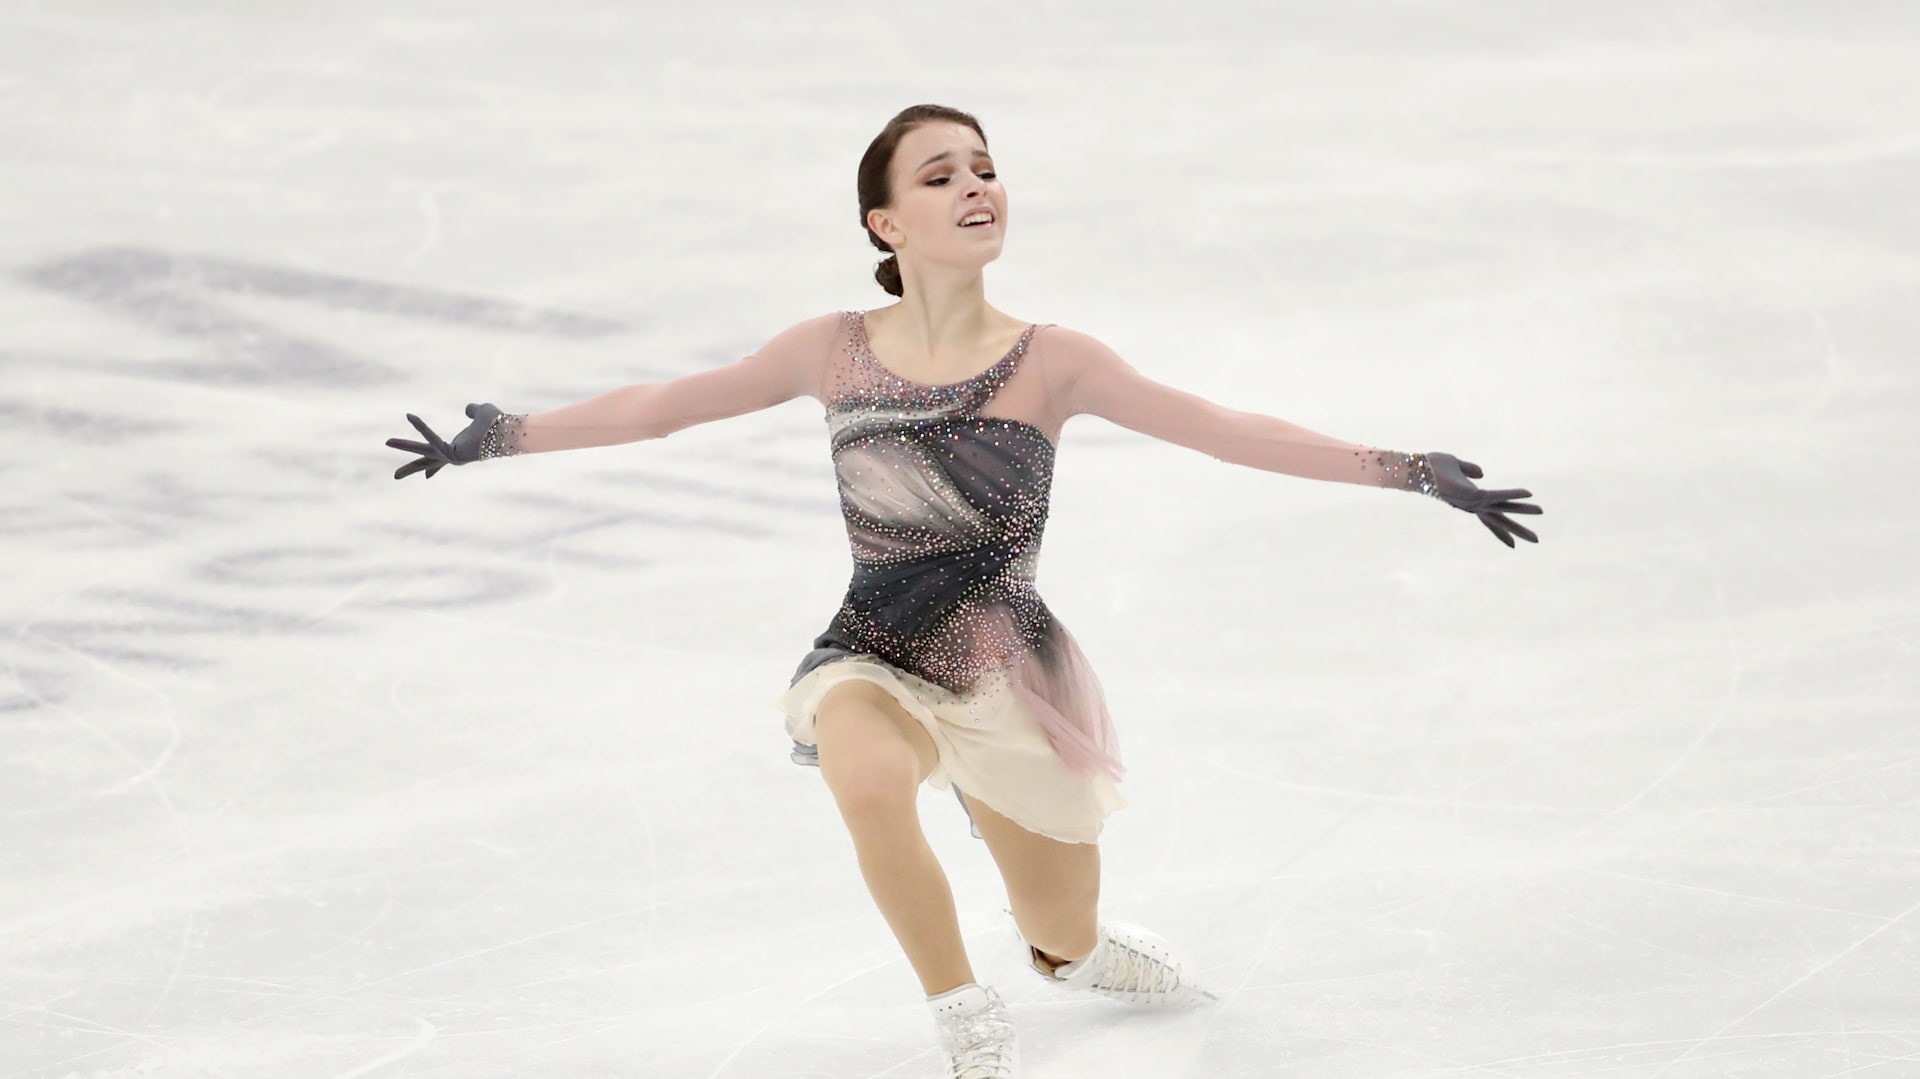 Russian figure skating nationals Preview, schedule and stars to watch